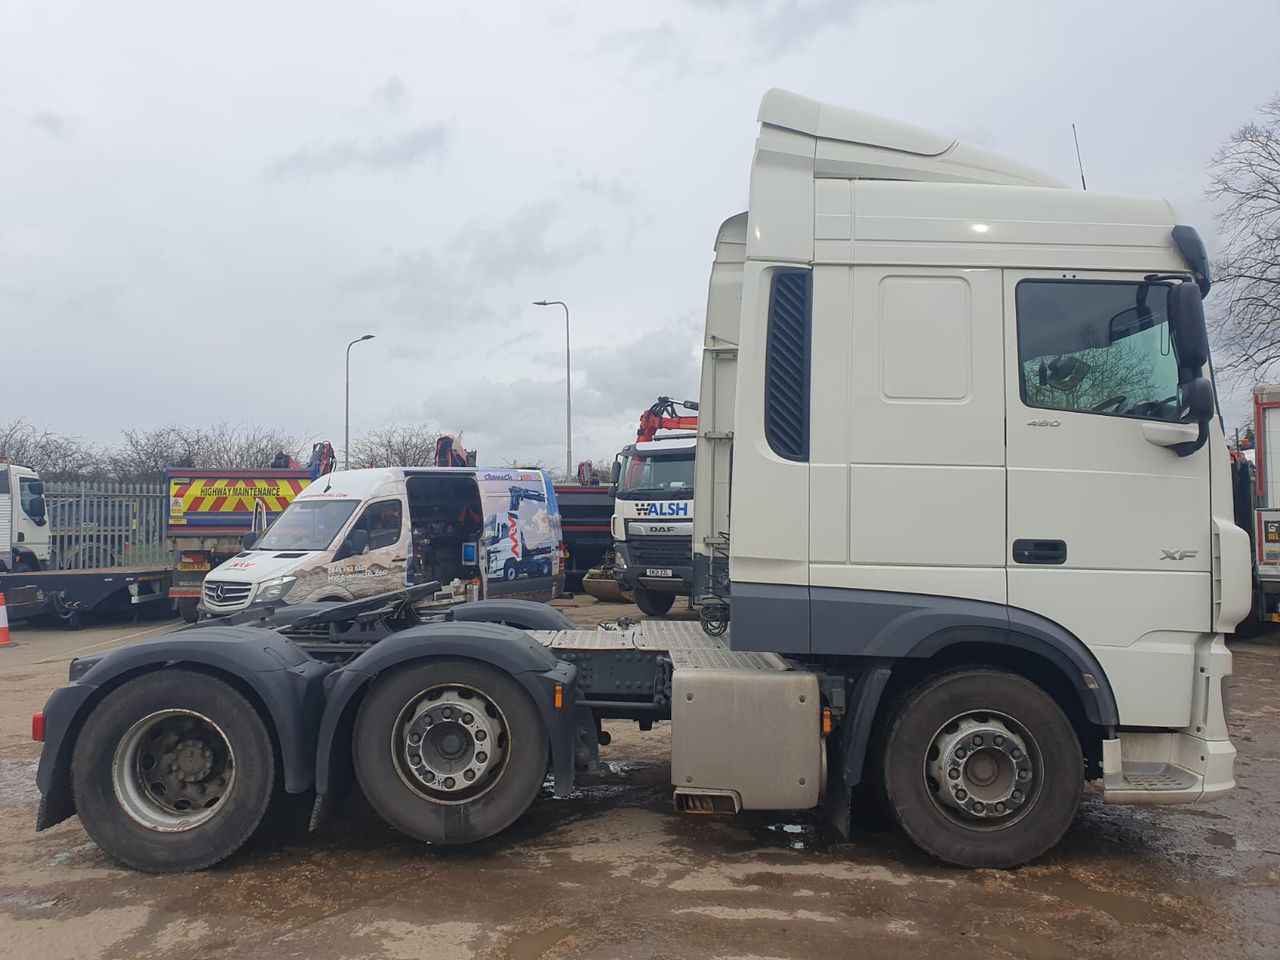 Ready to go DAF FTG XF480, Tractor Unit, 480, 44 Tonne, Space Cab, Automatic, Multi Function Steering Wheel, Air Conditioning, Double Bunk, Cab Fridge, Height Indicator, , -, - | for sale at MV Commercial, the UKs leading Truck, Trailers and Van supplier. (PF68UFG 97812)